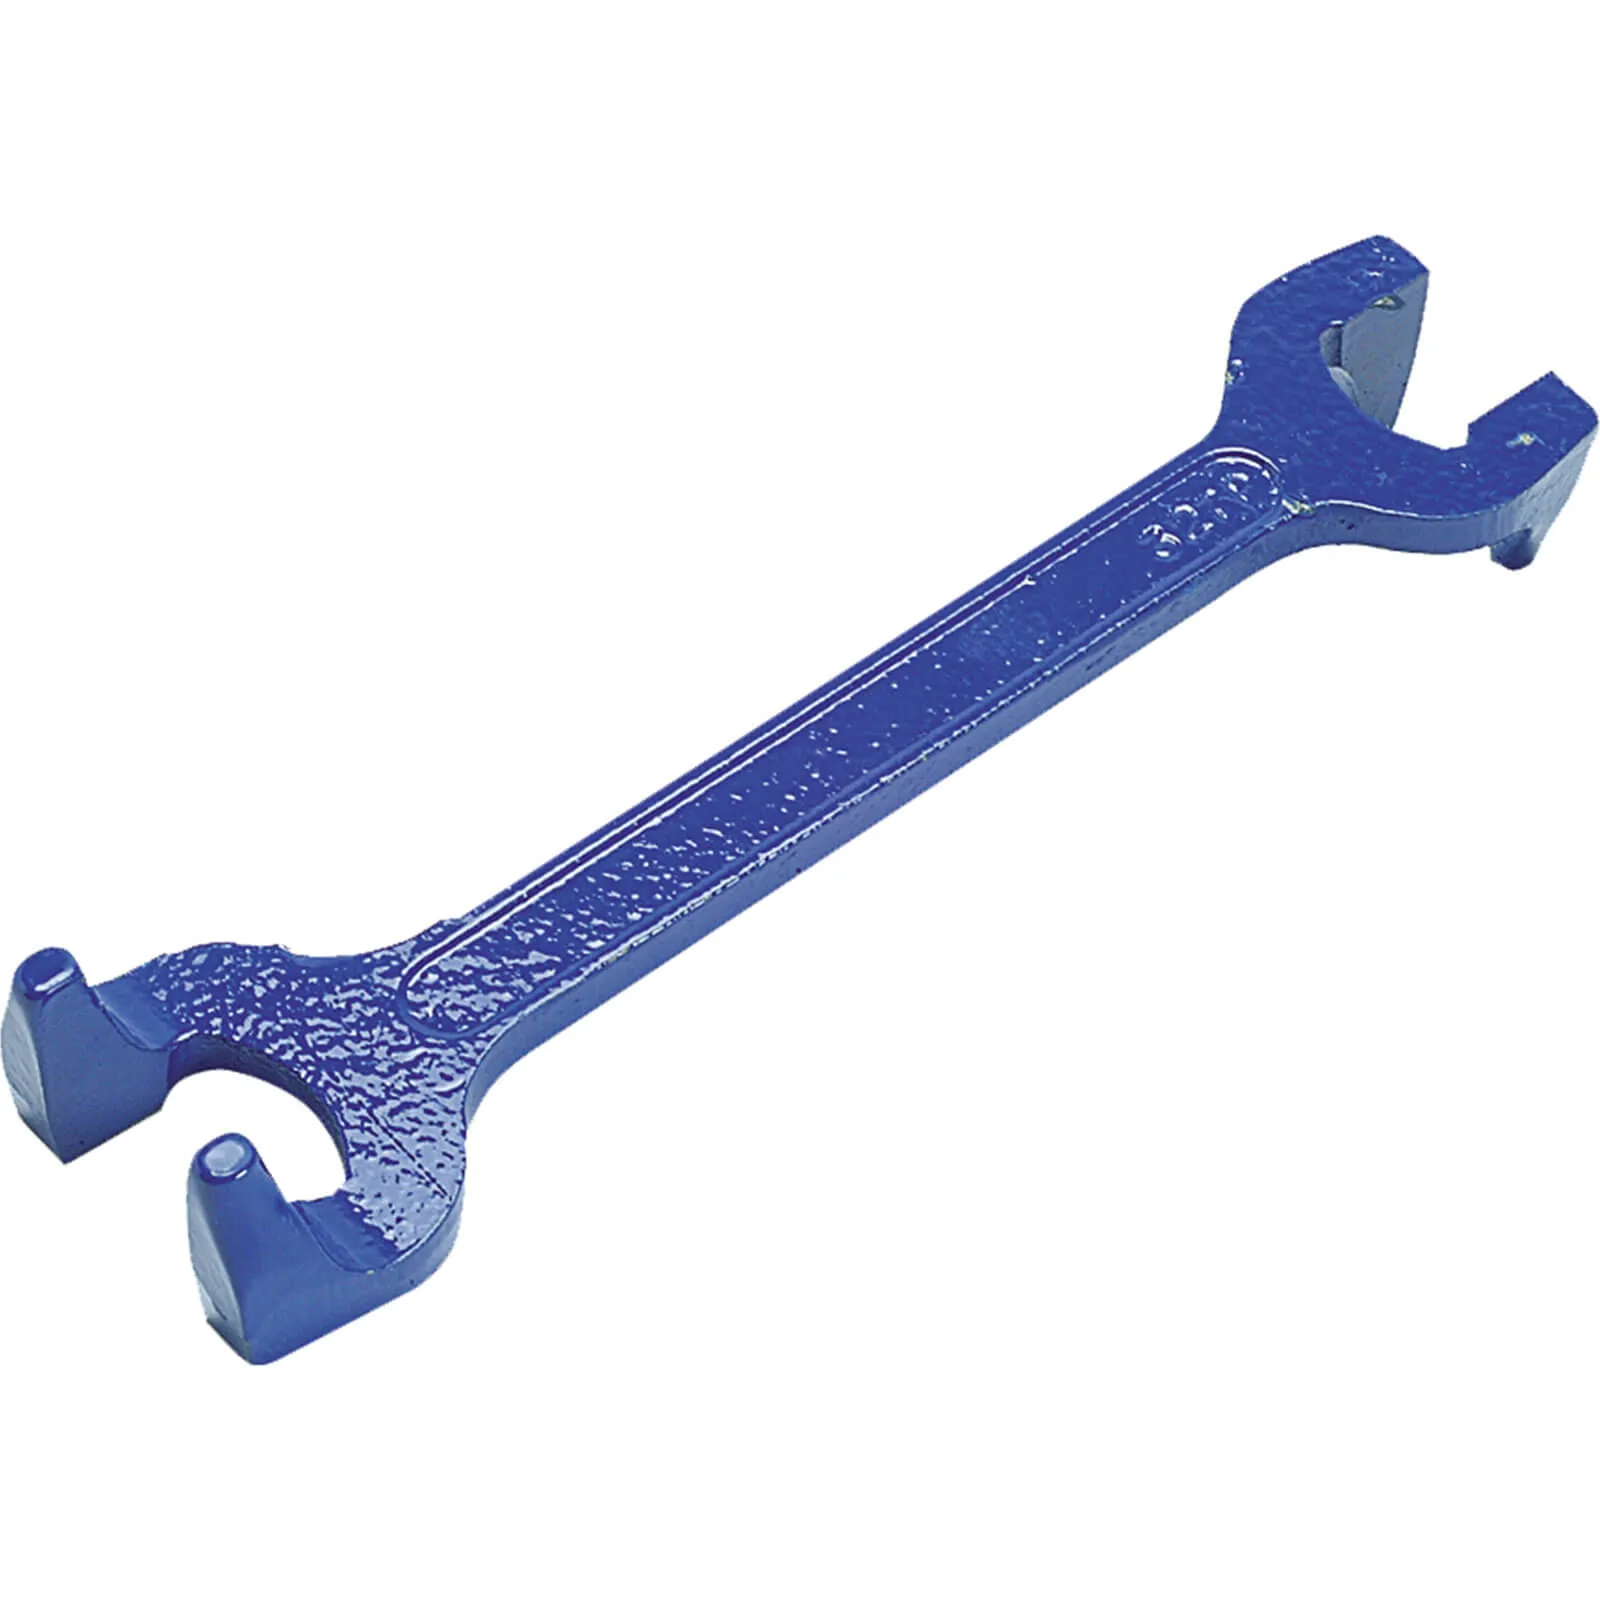 Monument 327R Basin Wrench - 15mm x 22mm